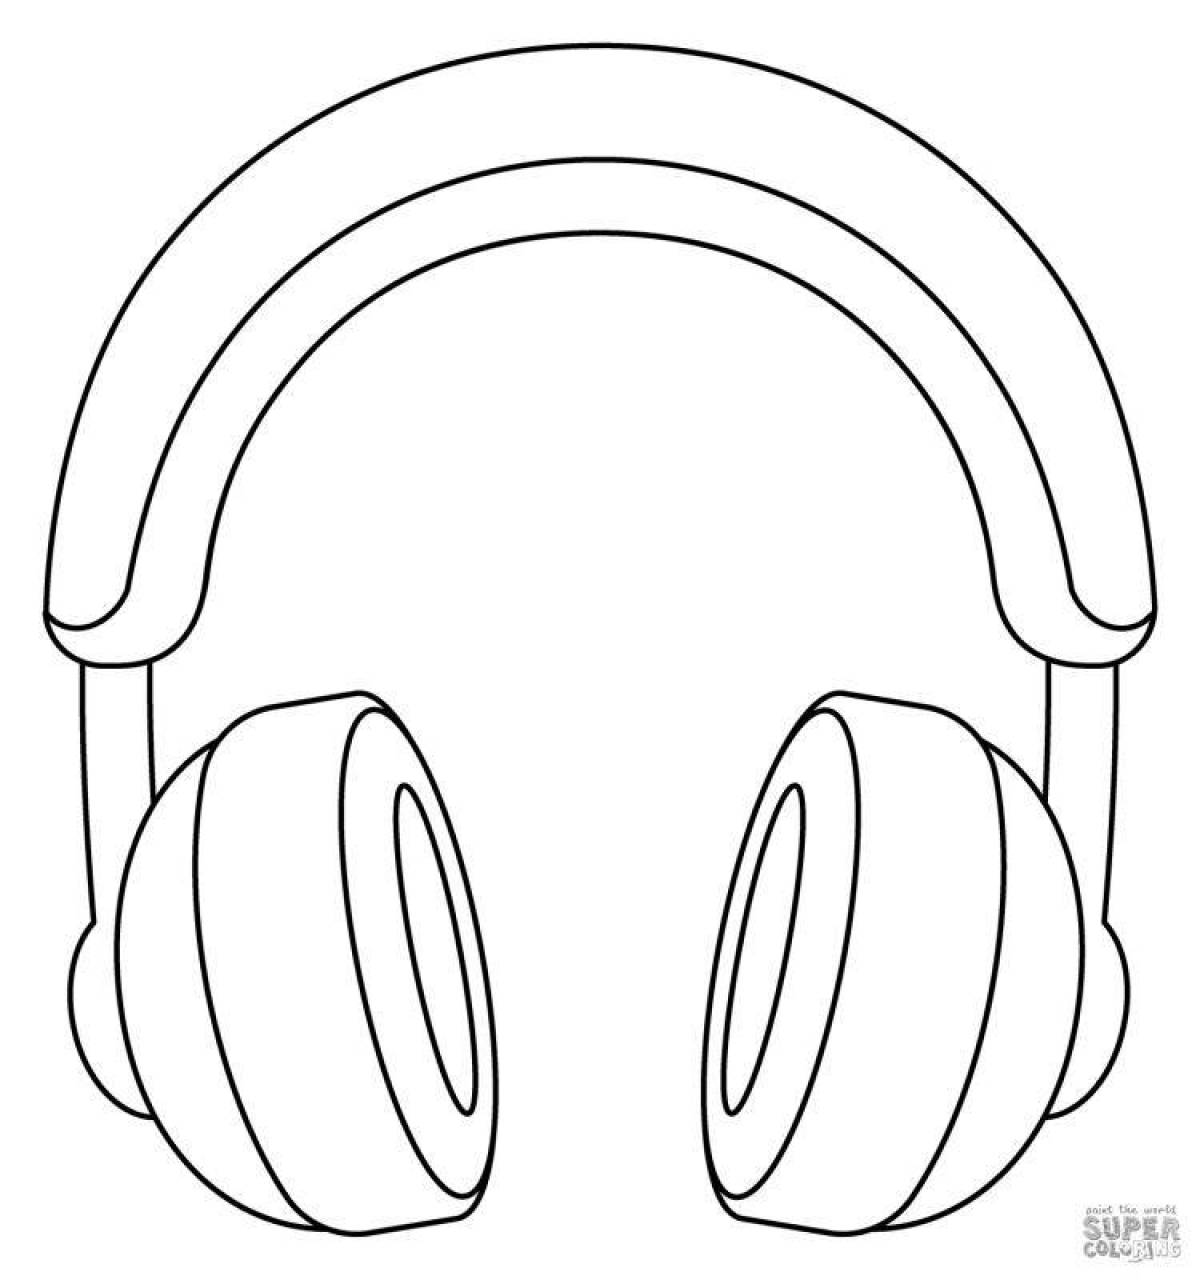 Exquisite wireless headphones coloring page